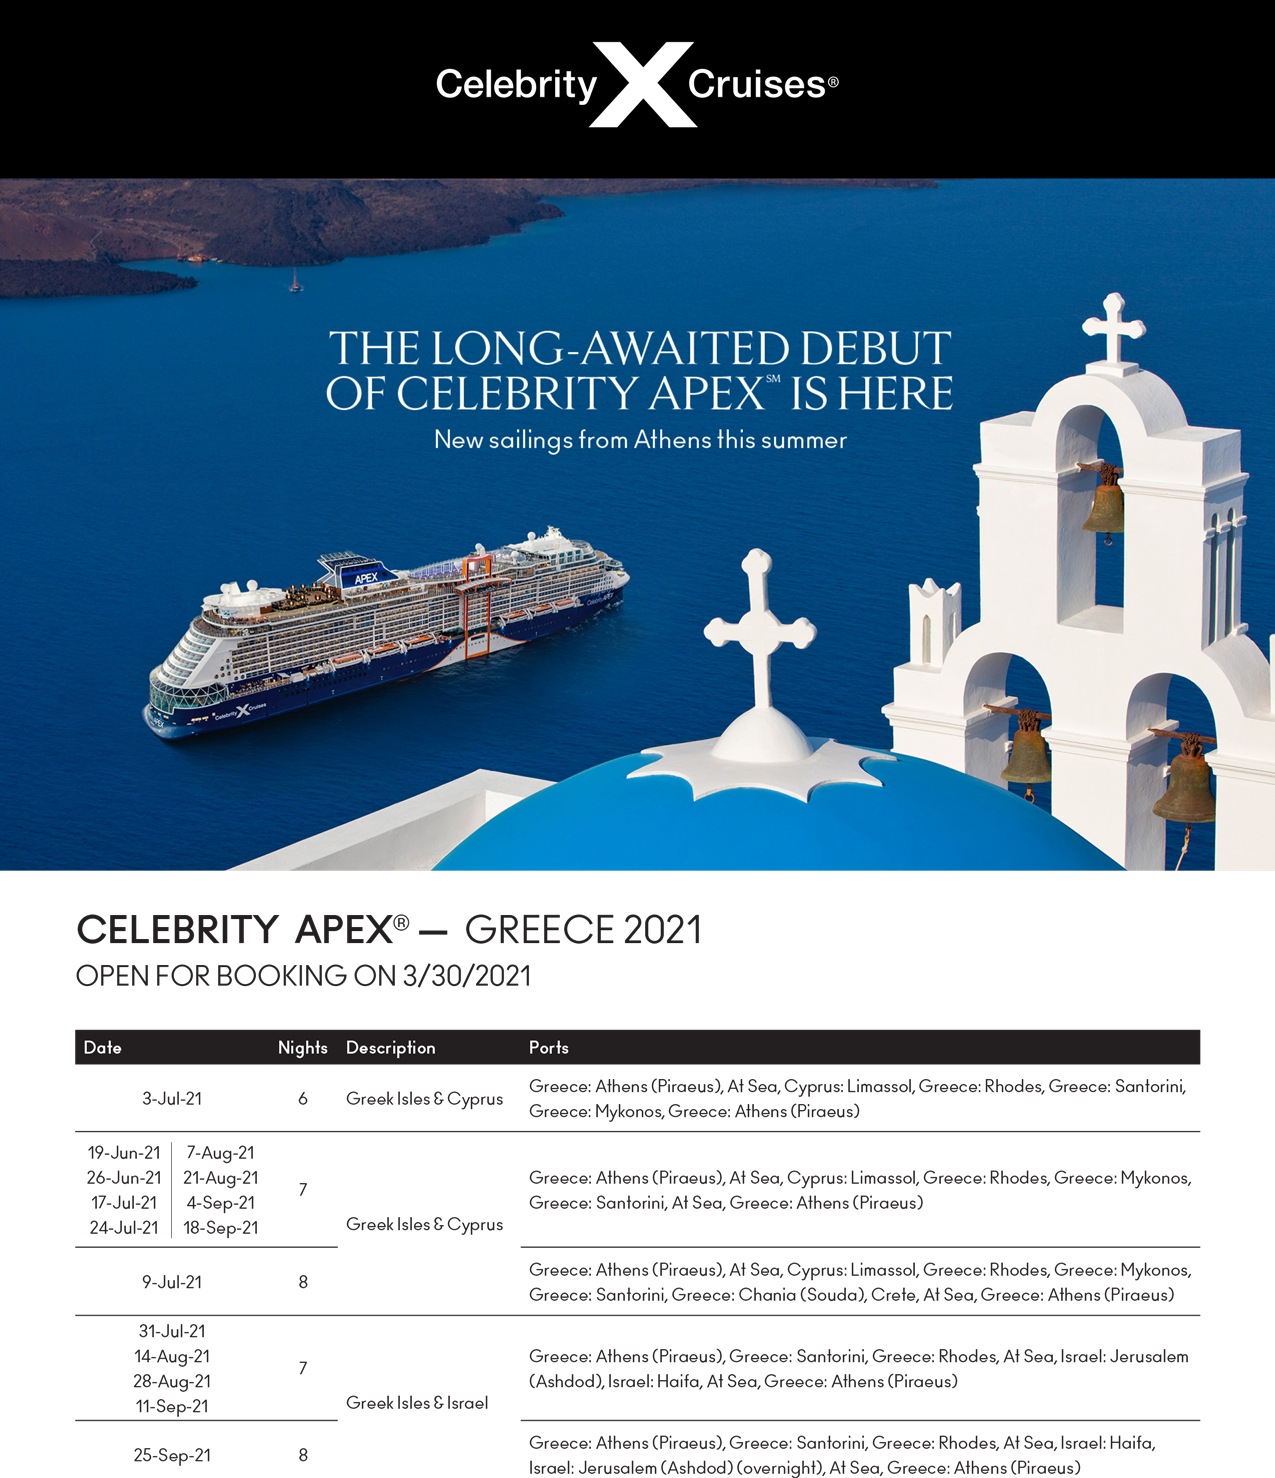 Continuing Education, Inc. CME Cruise Conferences. Continuing Medical